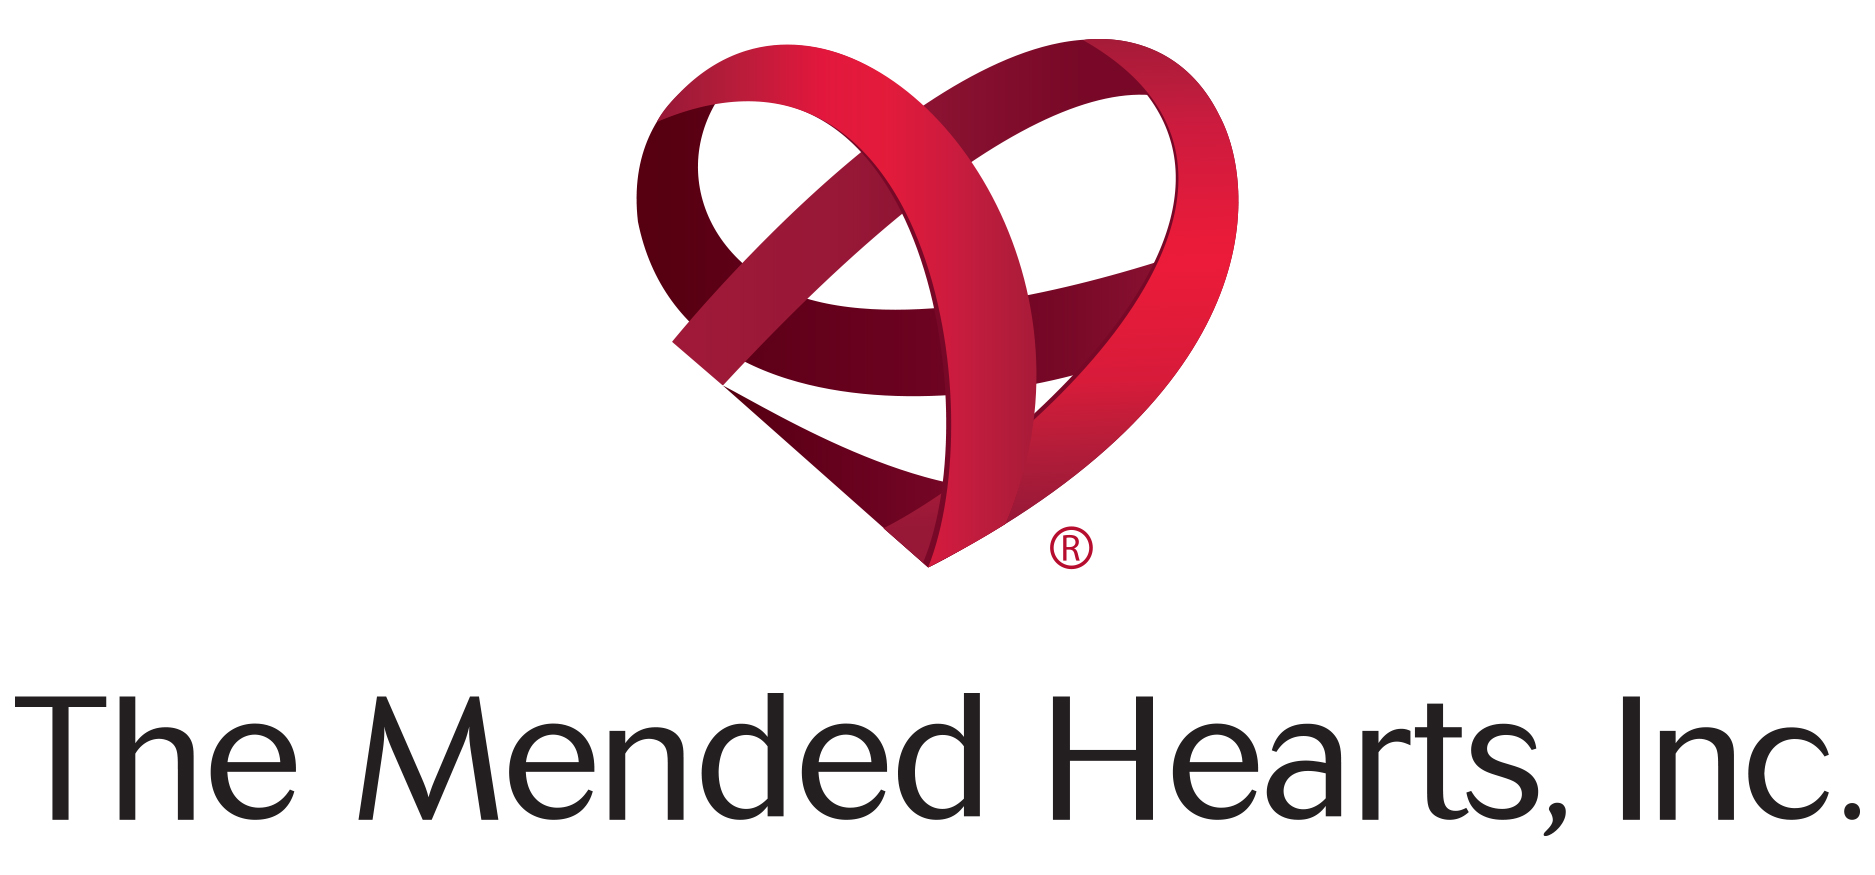 The Mended Hearts